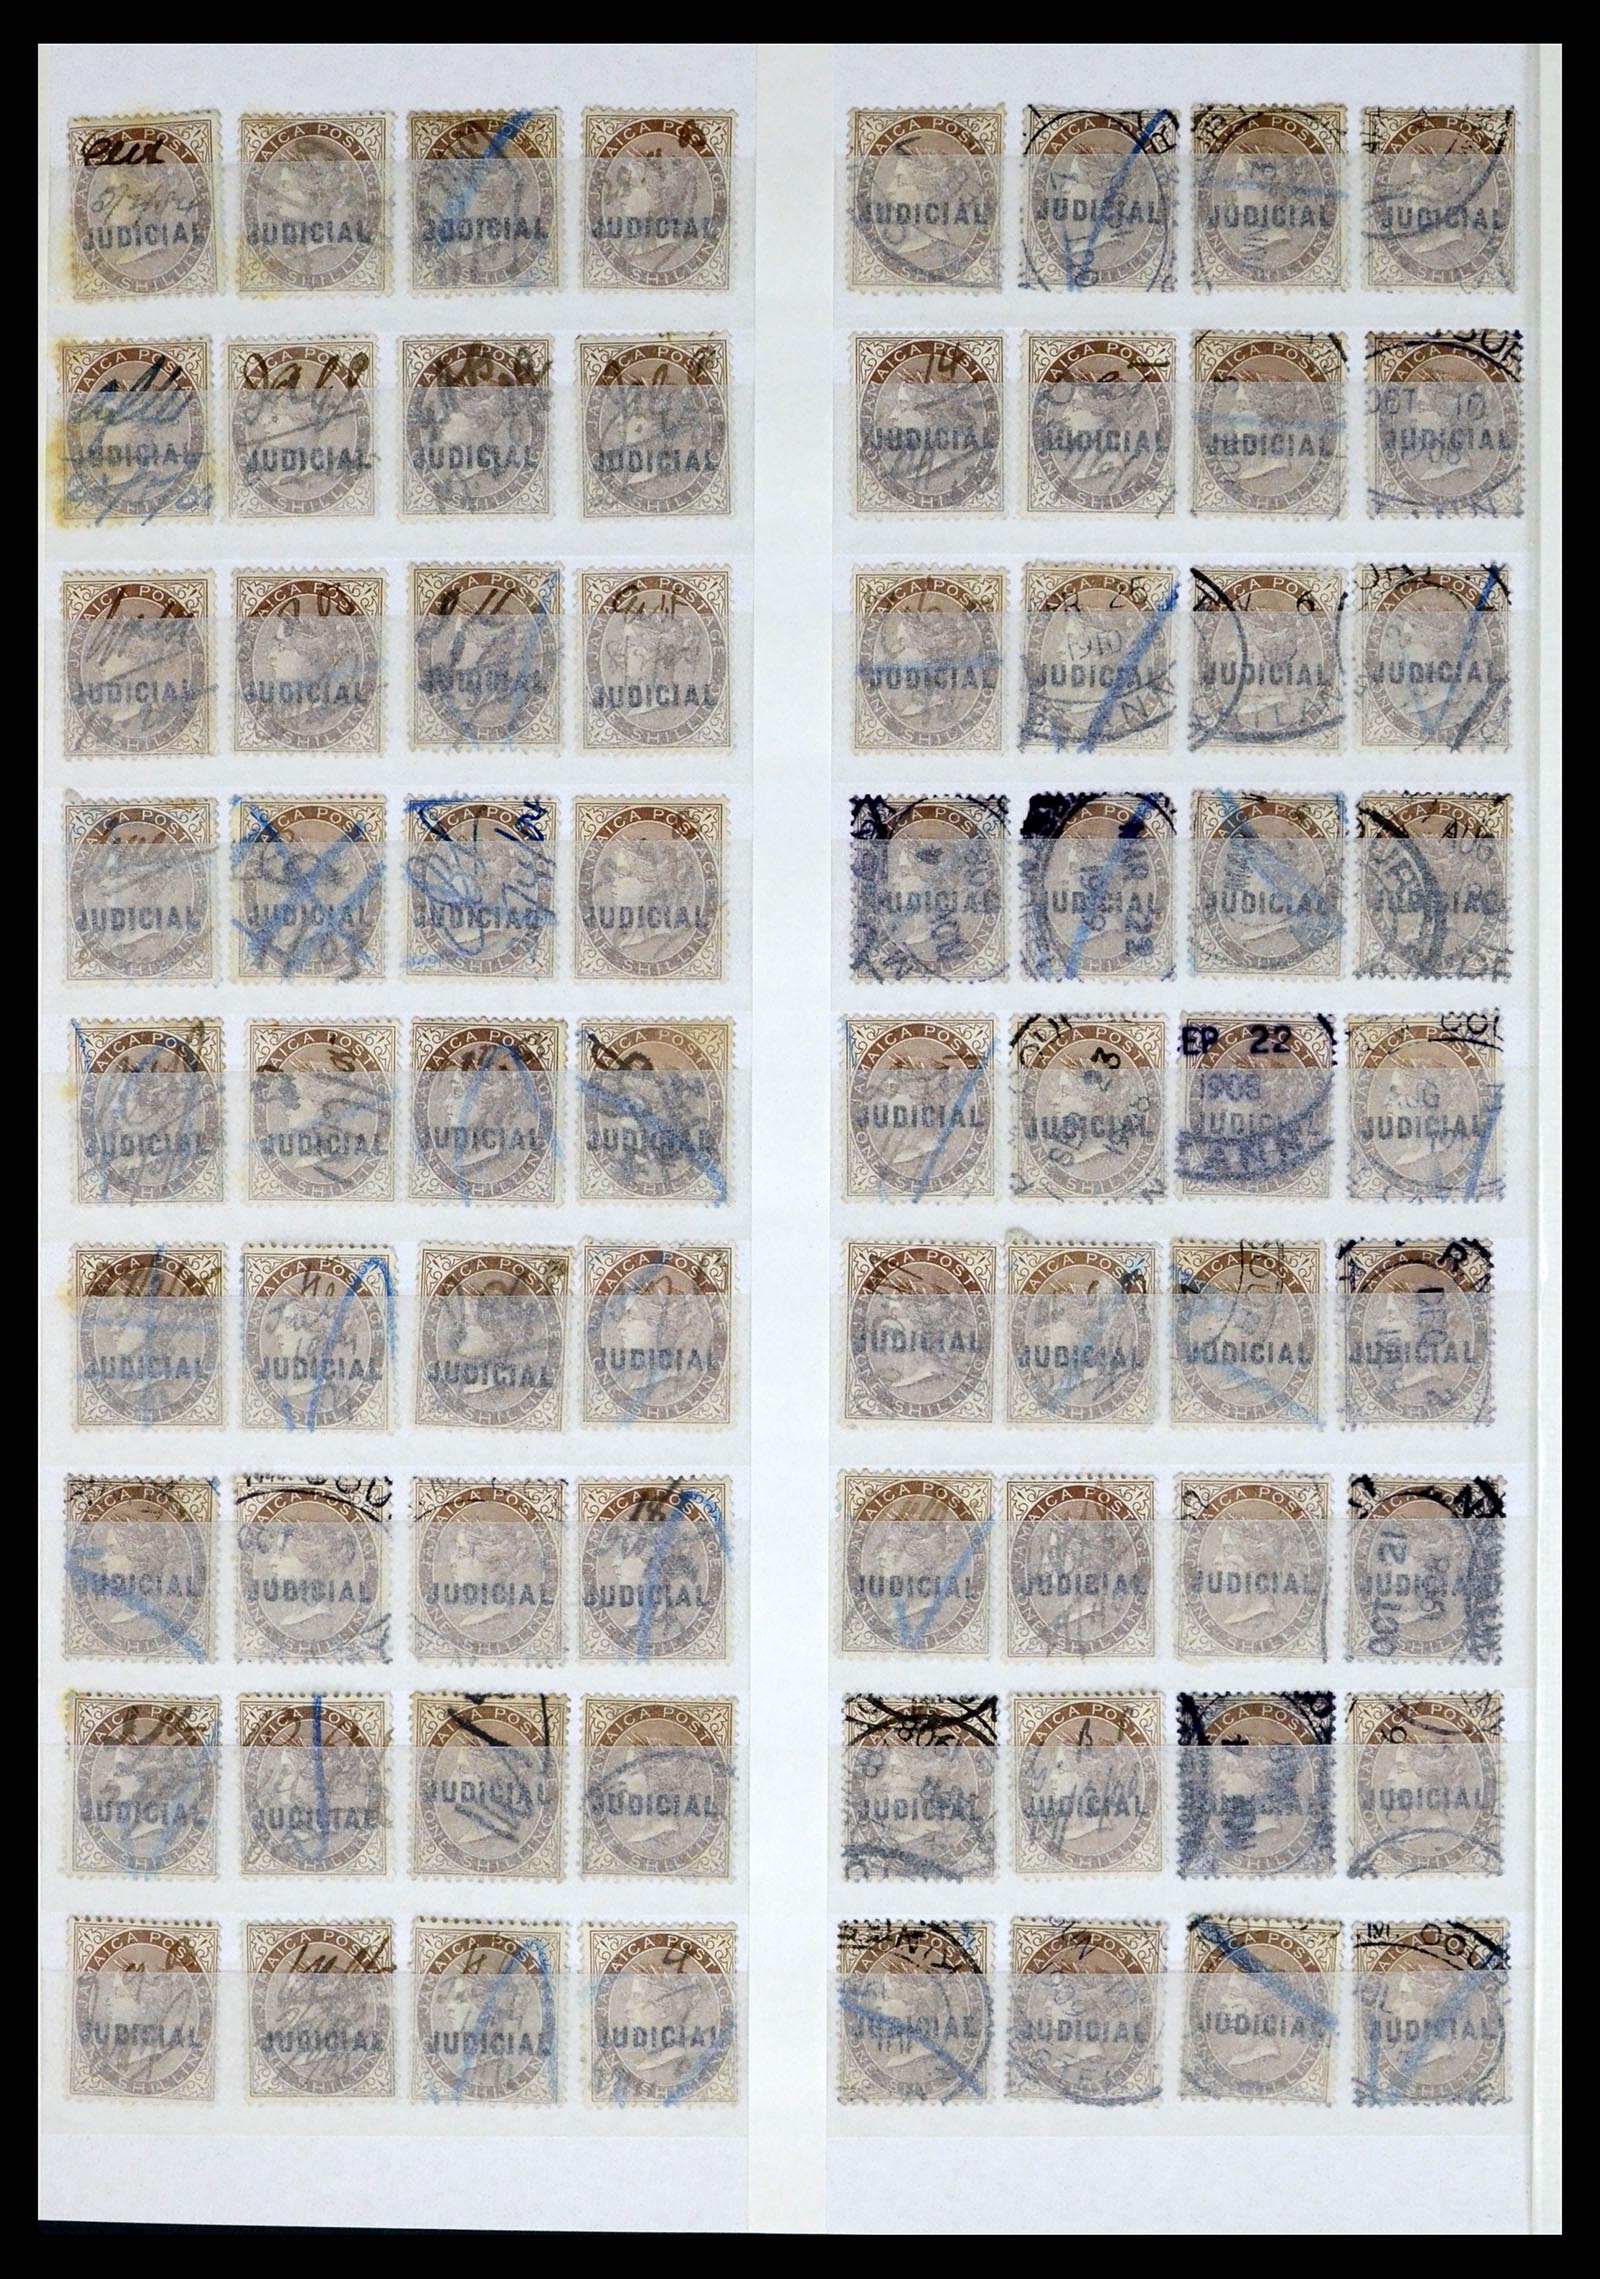 36920 029 - Stamp collection 36920 Jamaica cancels 1860-ca. 1920.